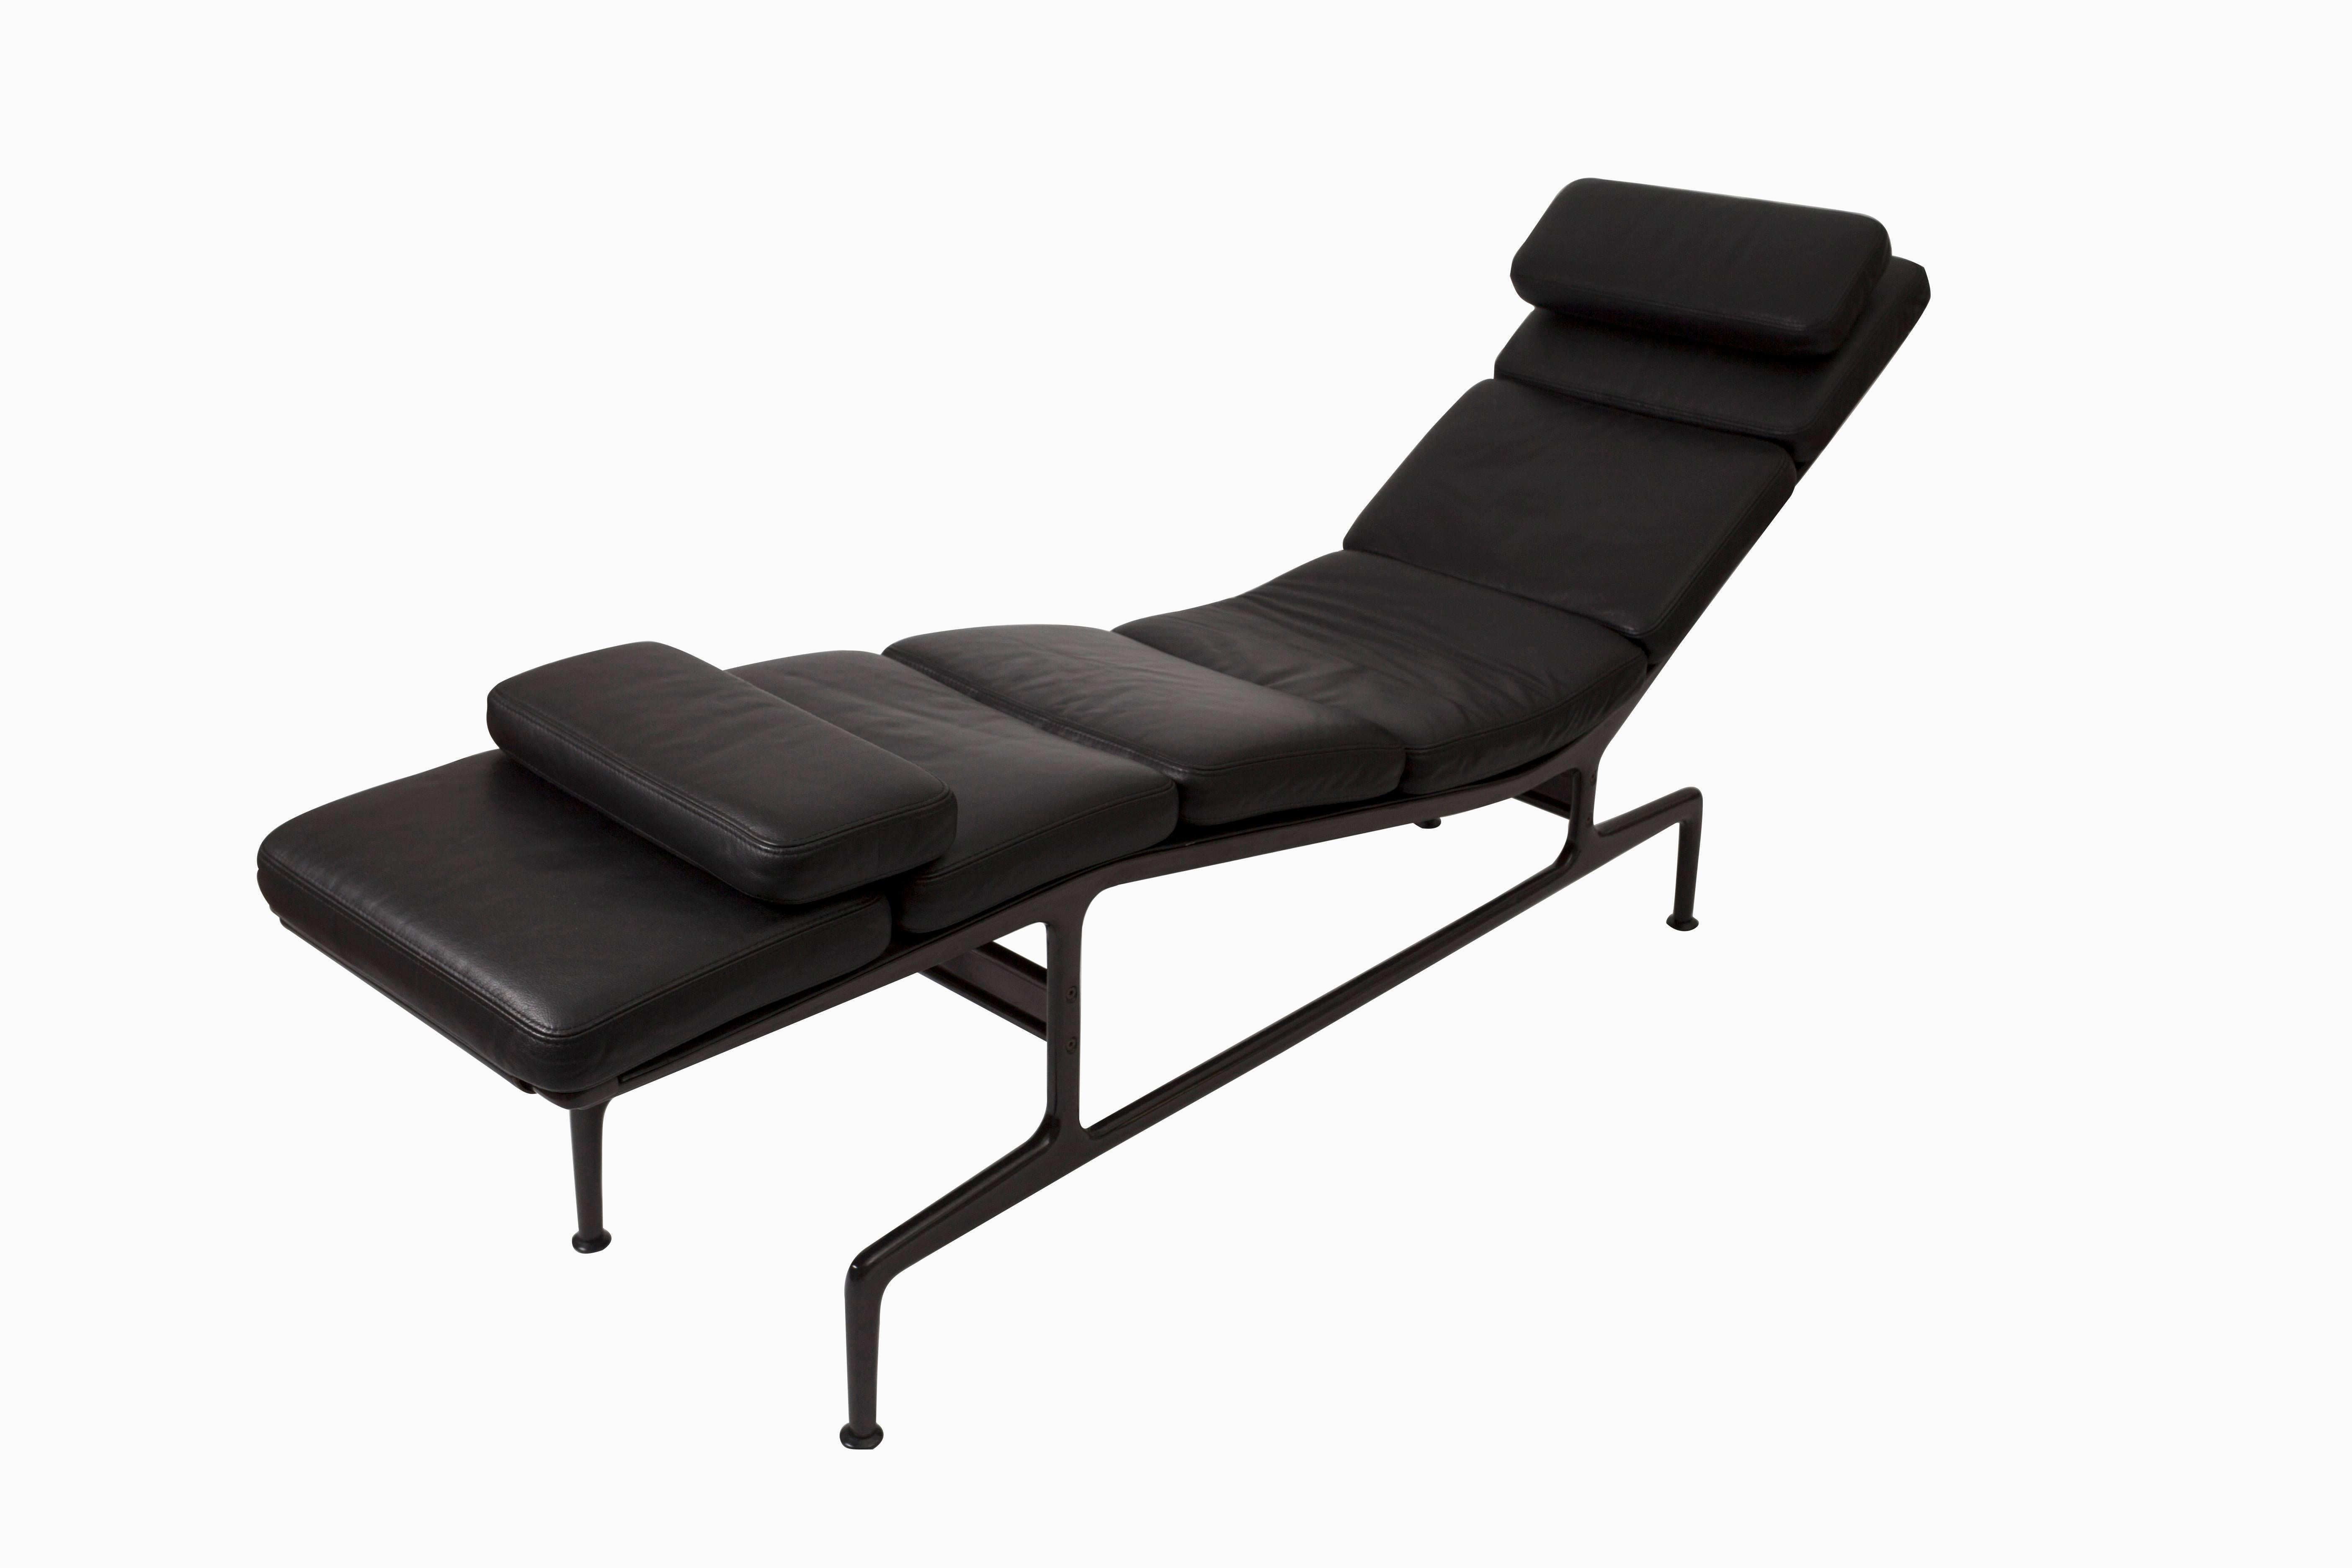 The Eames soft pad chaise is perfect for taking a nap. It is very comfortable with its two loose cushions, one of them supporting your neck, the other your calves, yet it is so narrow that your arms will fall off your chest when you get into a